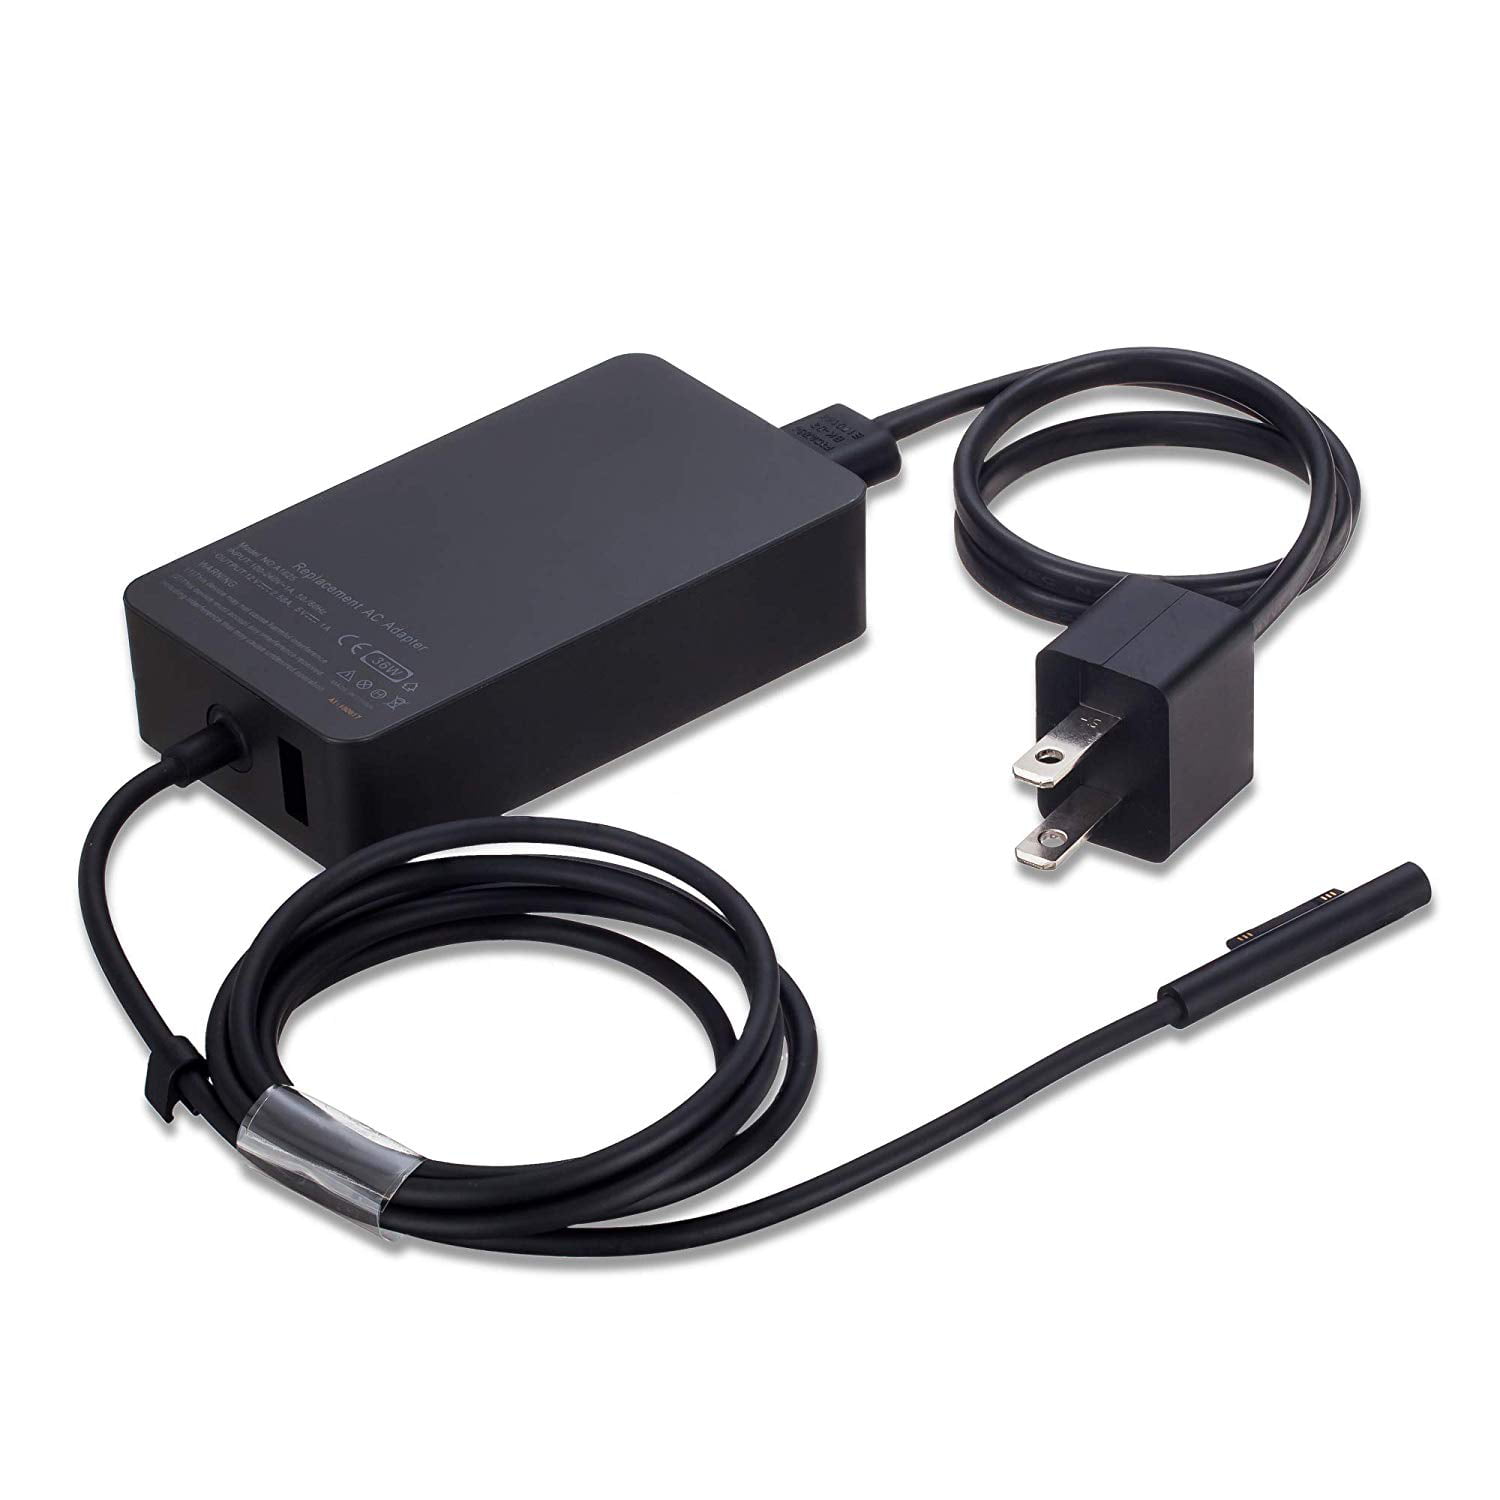 Ebk 36w Power Adapter Charger For Microsoft Surface Pro 3 Surface